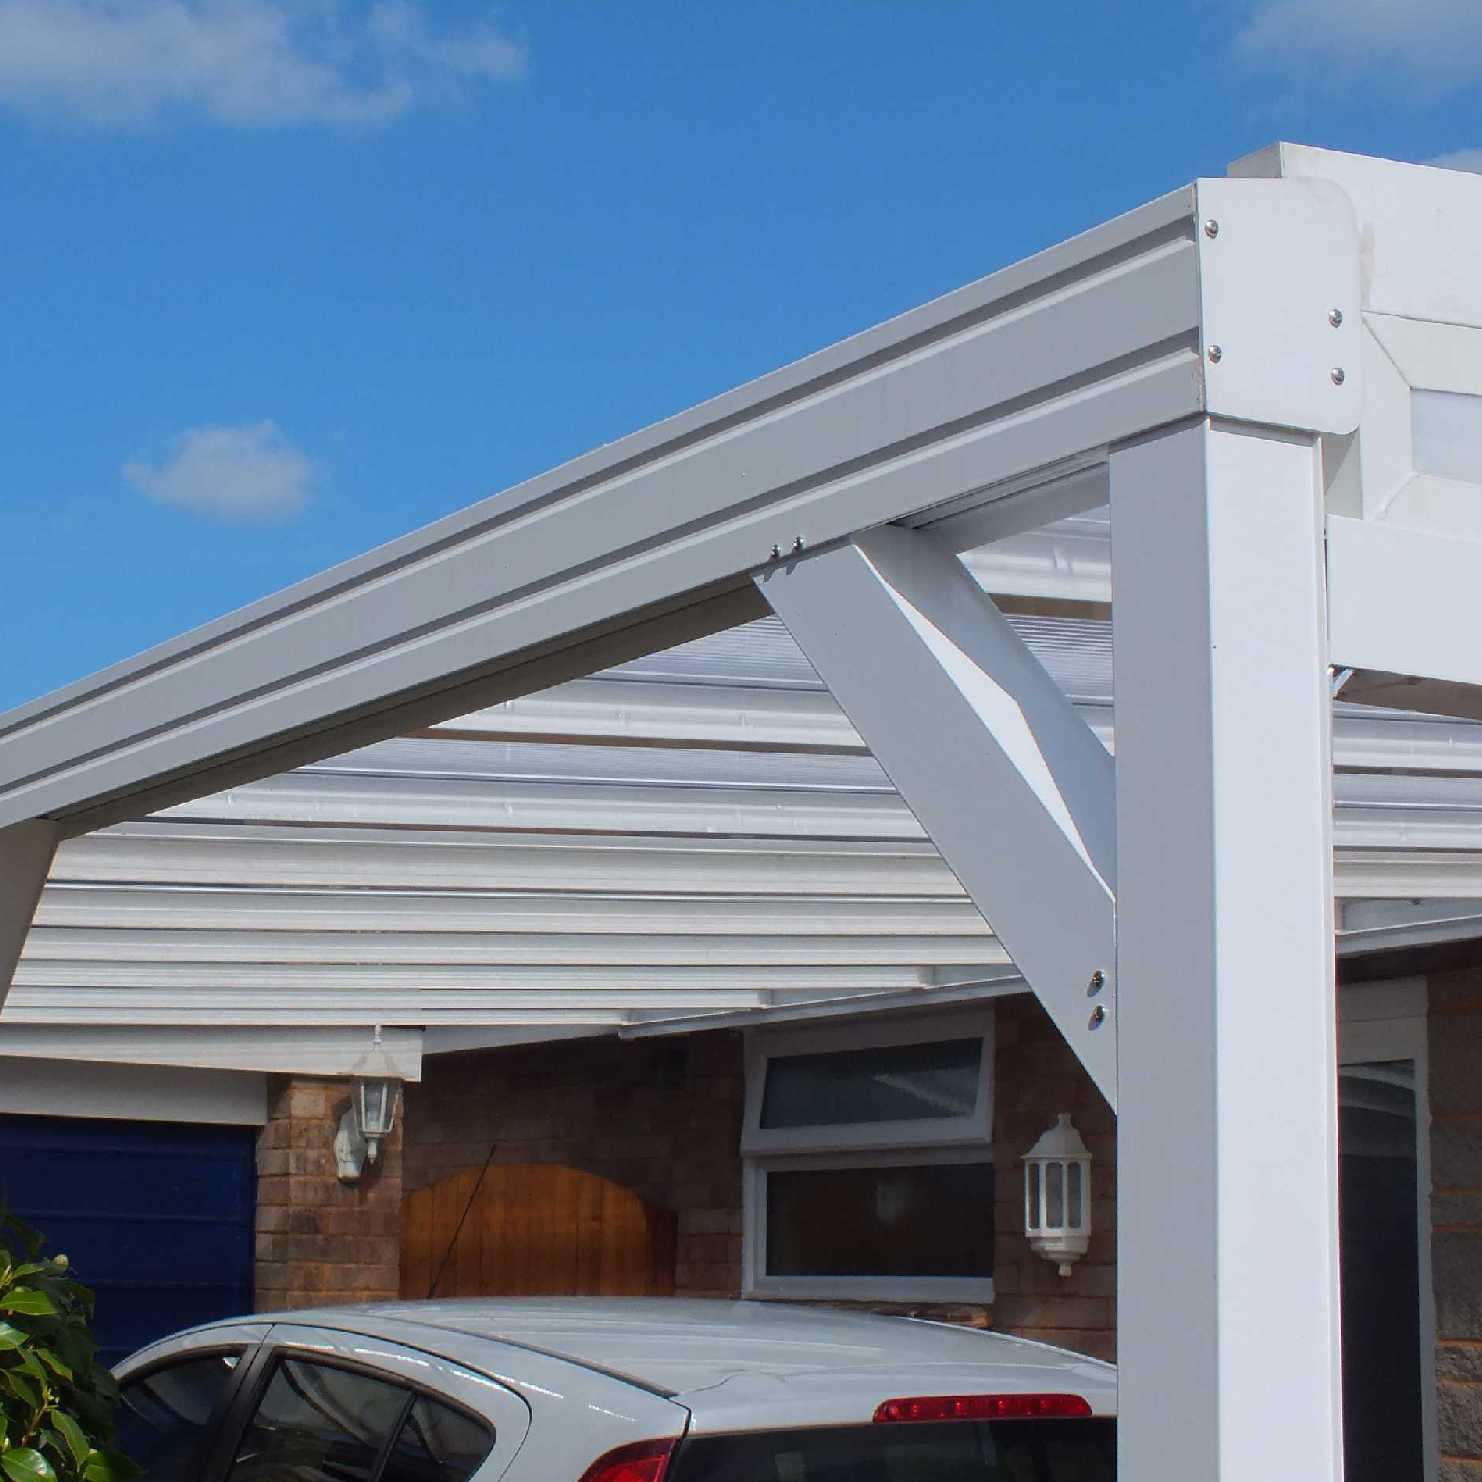 Great deals on Omega Smart Lean-To Canopy, White with 16mm Polycarbonate Glazing - 2.8m (W) x 3.5m (P), (2) Supporting Posts